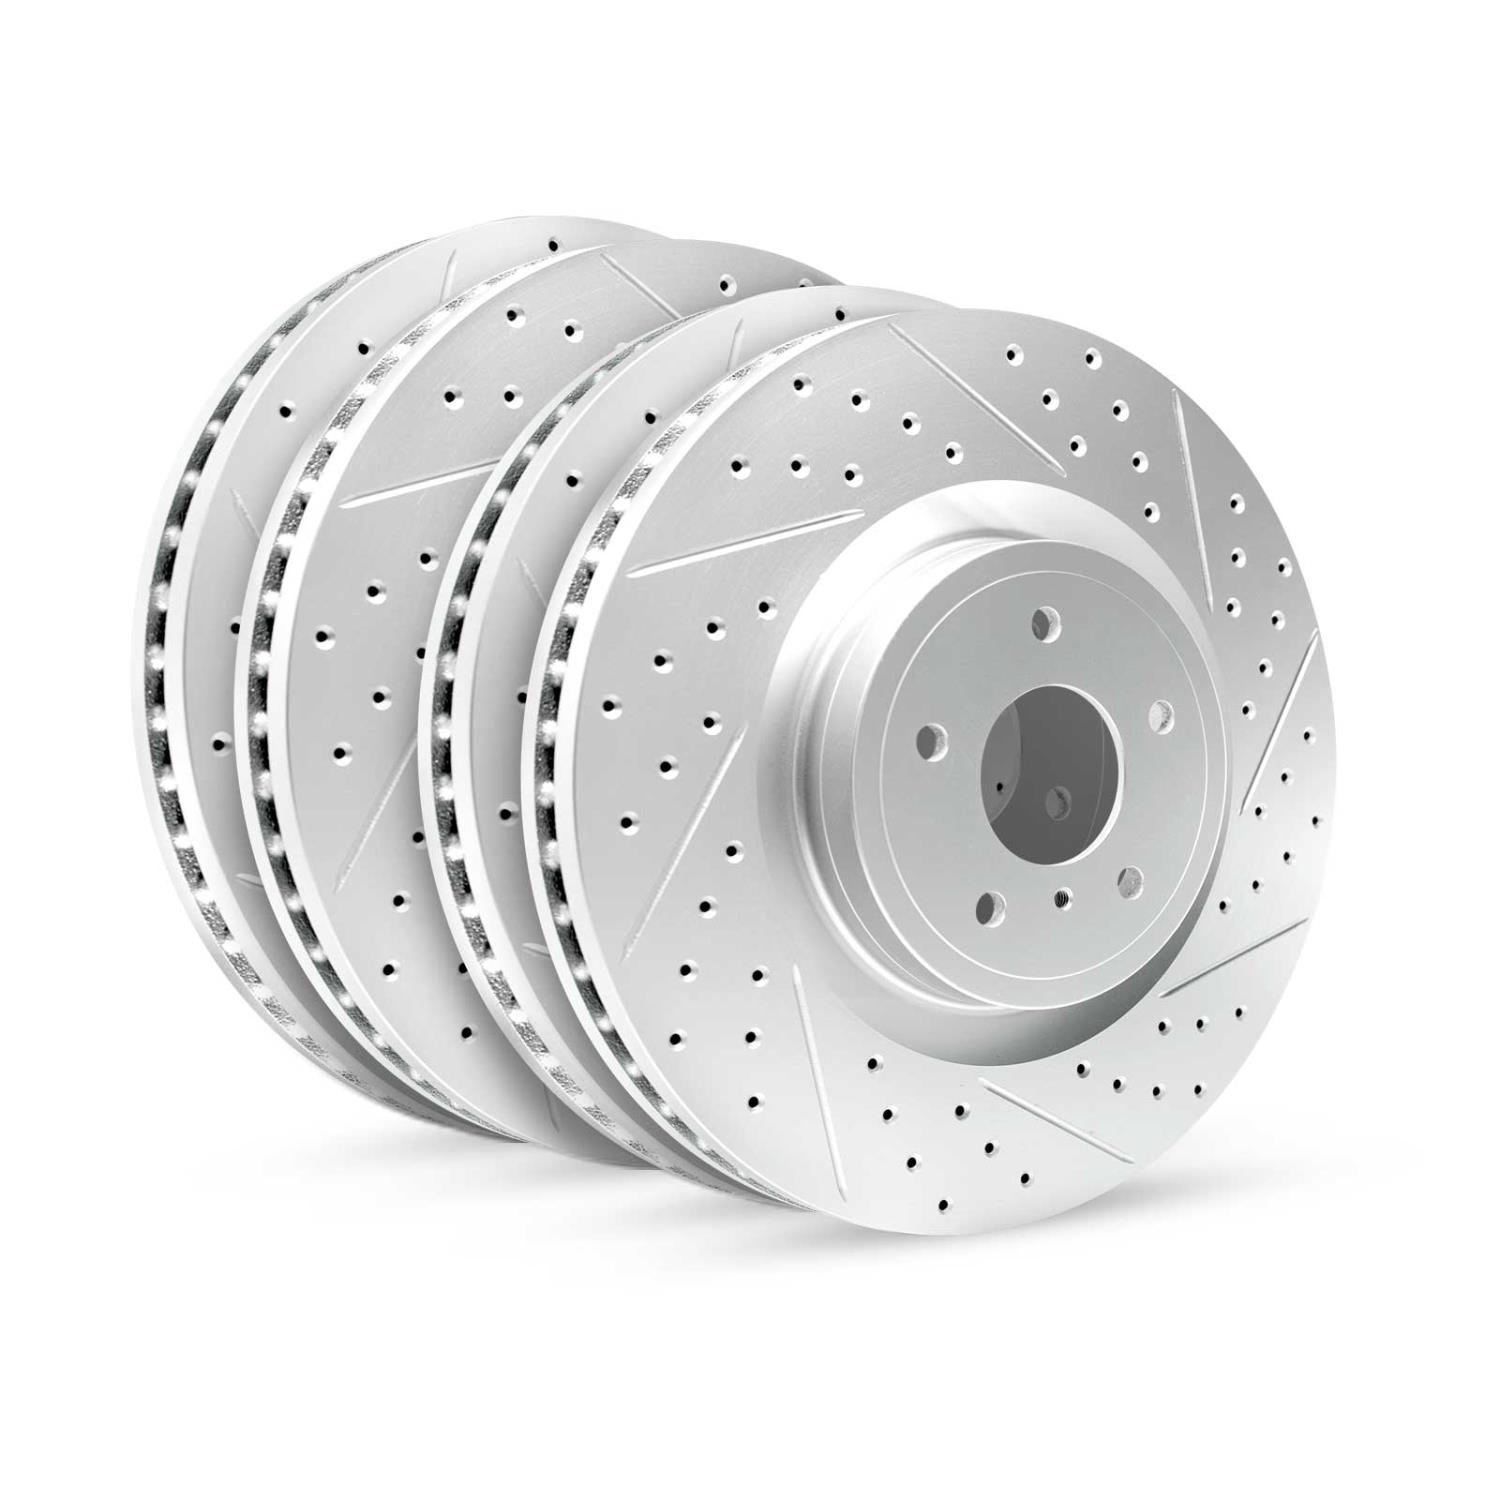 GEO-Carbon Drilled/Slotted Rotors, 2006-2012 Land Rover, Position: Front/Rear